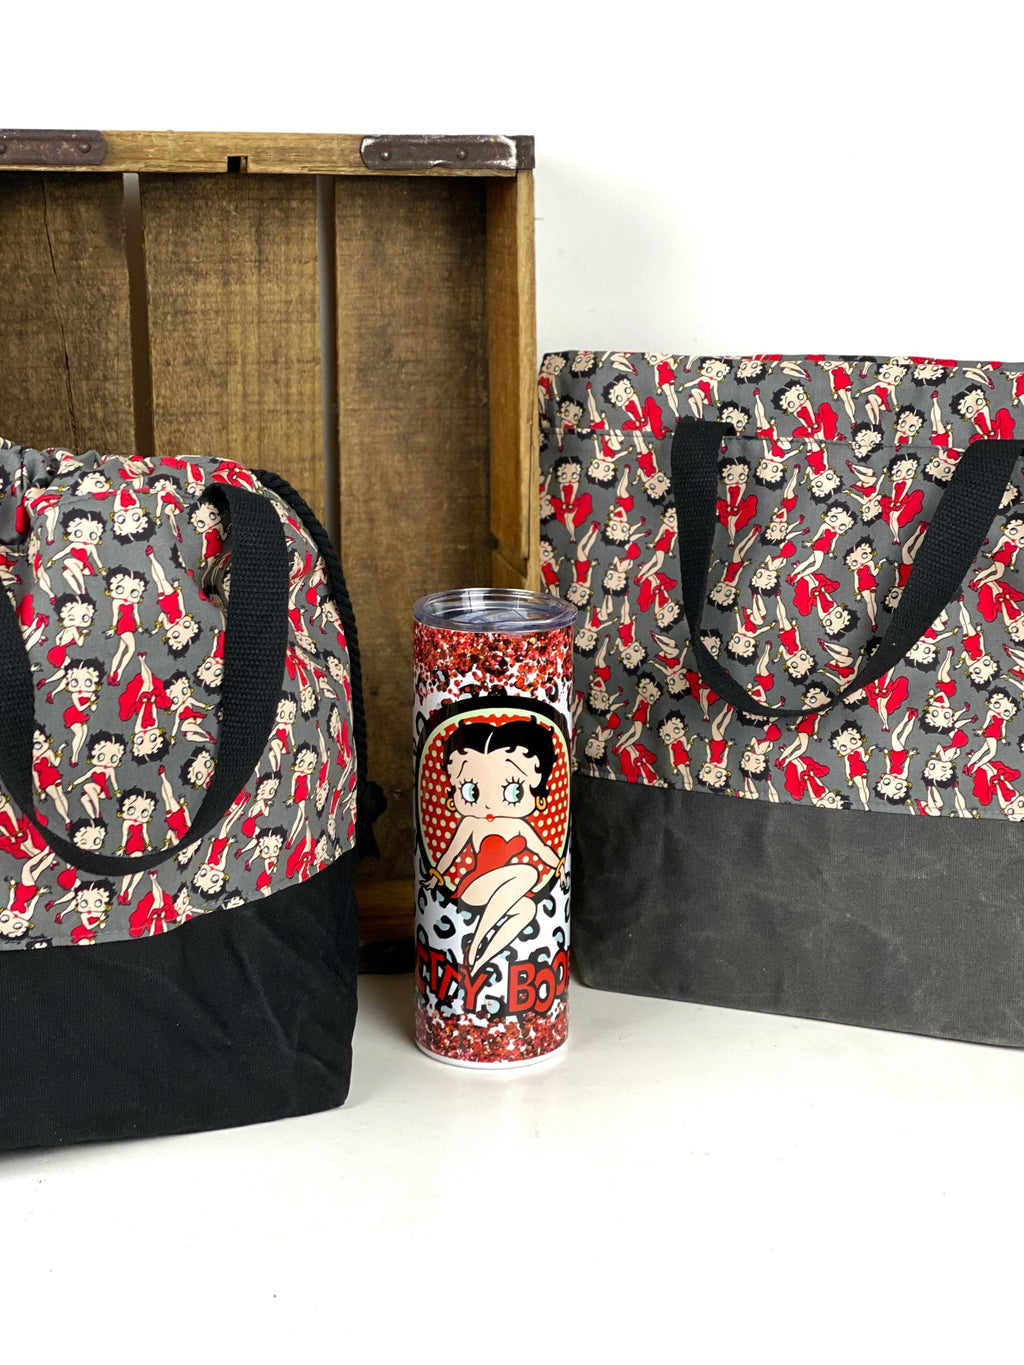 Betty Boop Cotton Project Bag, Project Bag for Knitters, Waxed Canvas Bag, Crochet Bag, Whimsical Project Bag